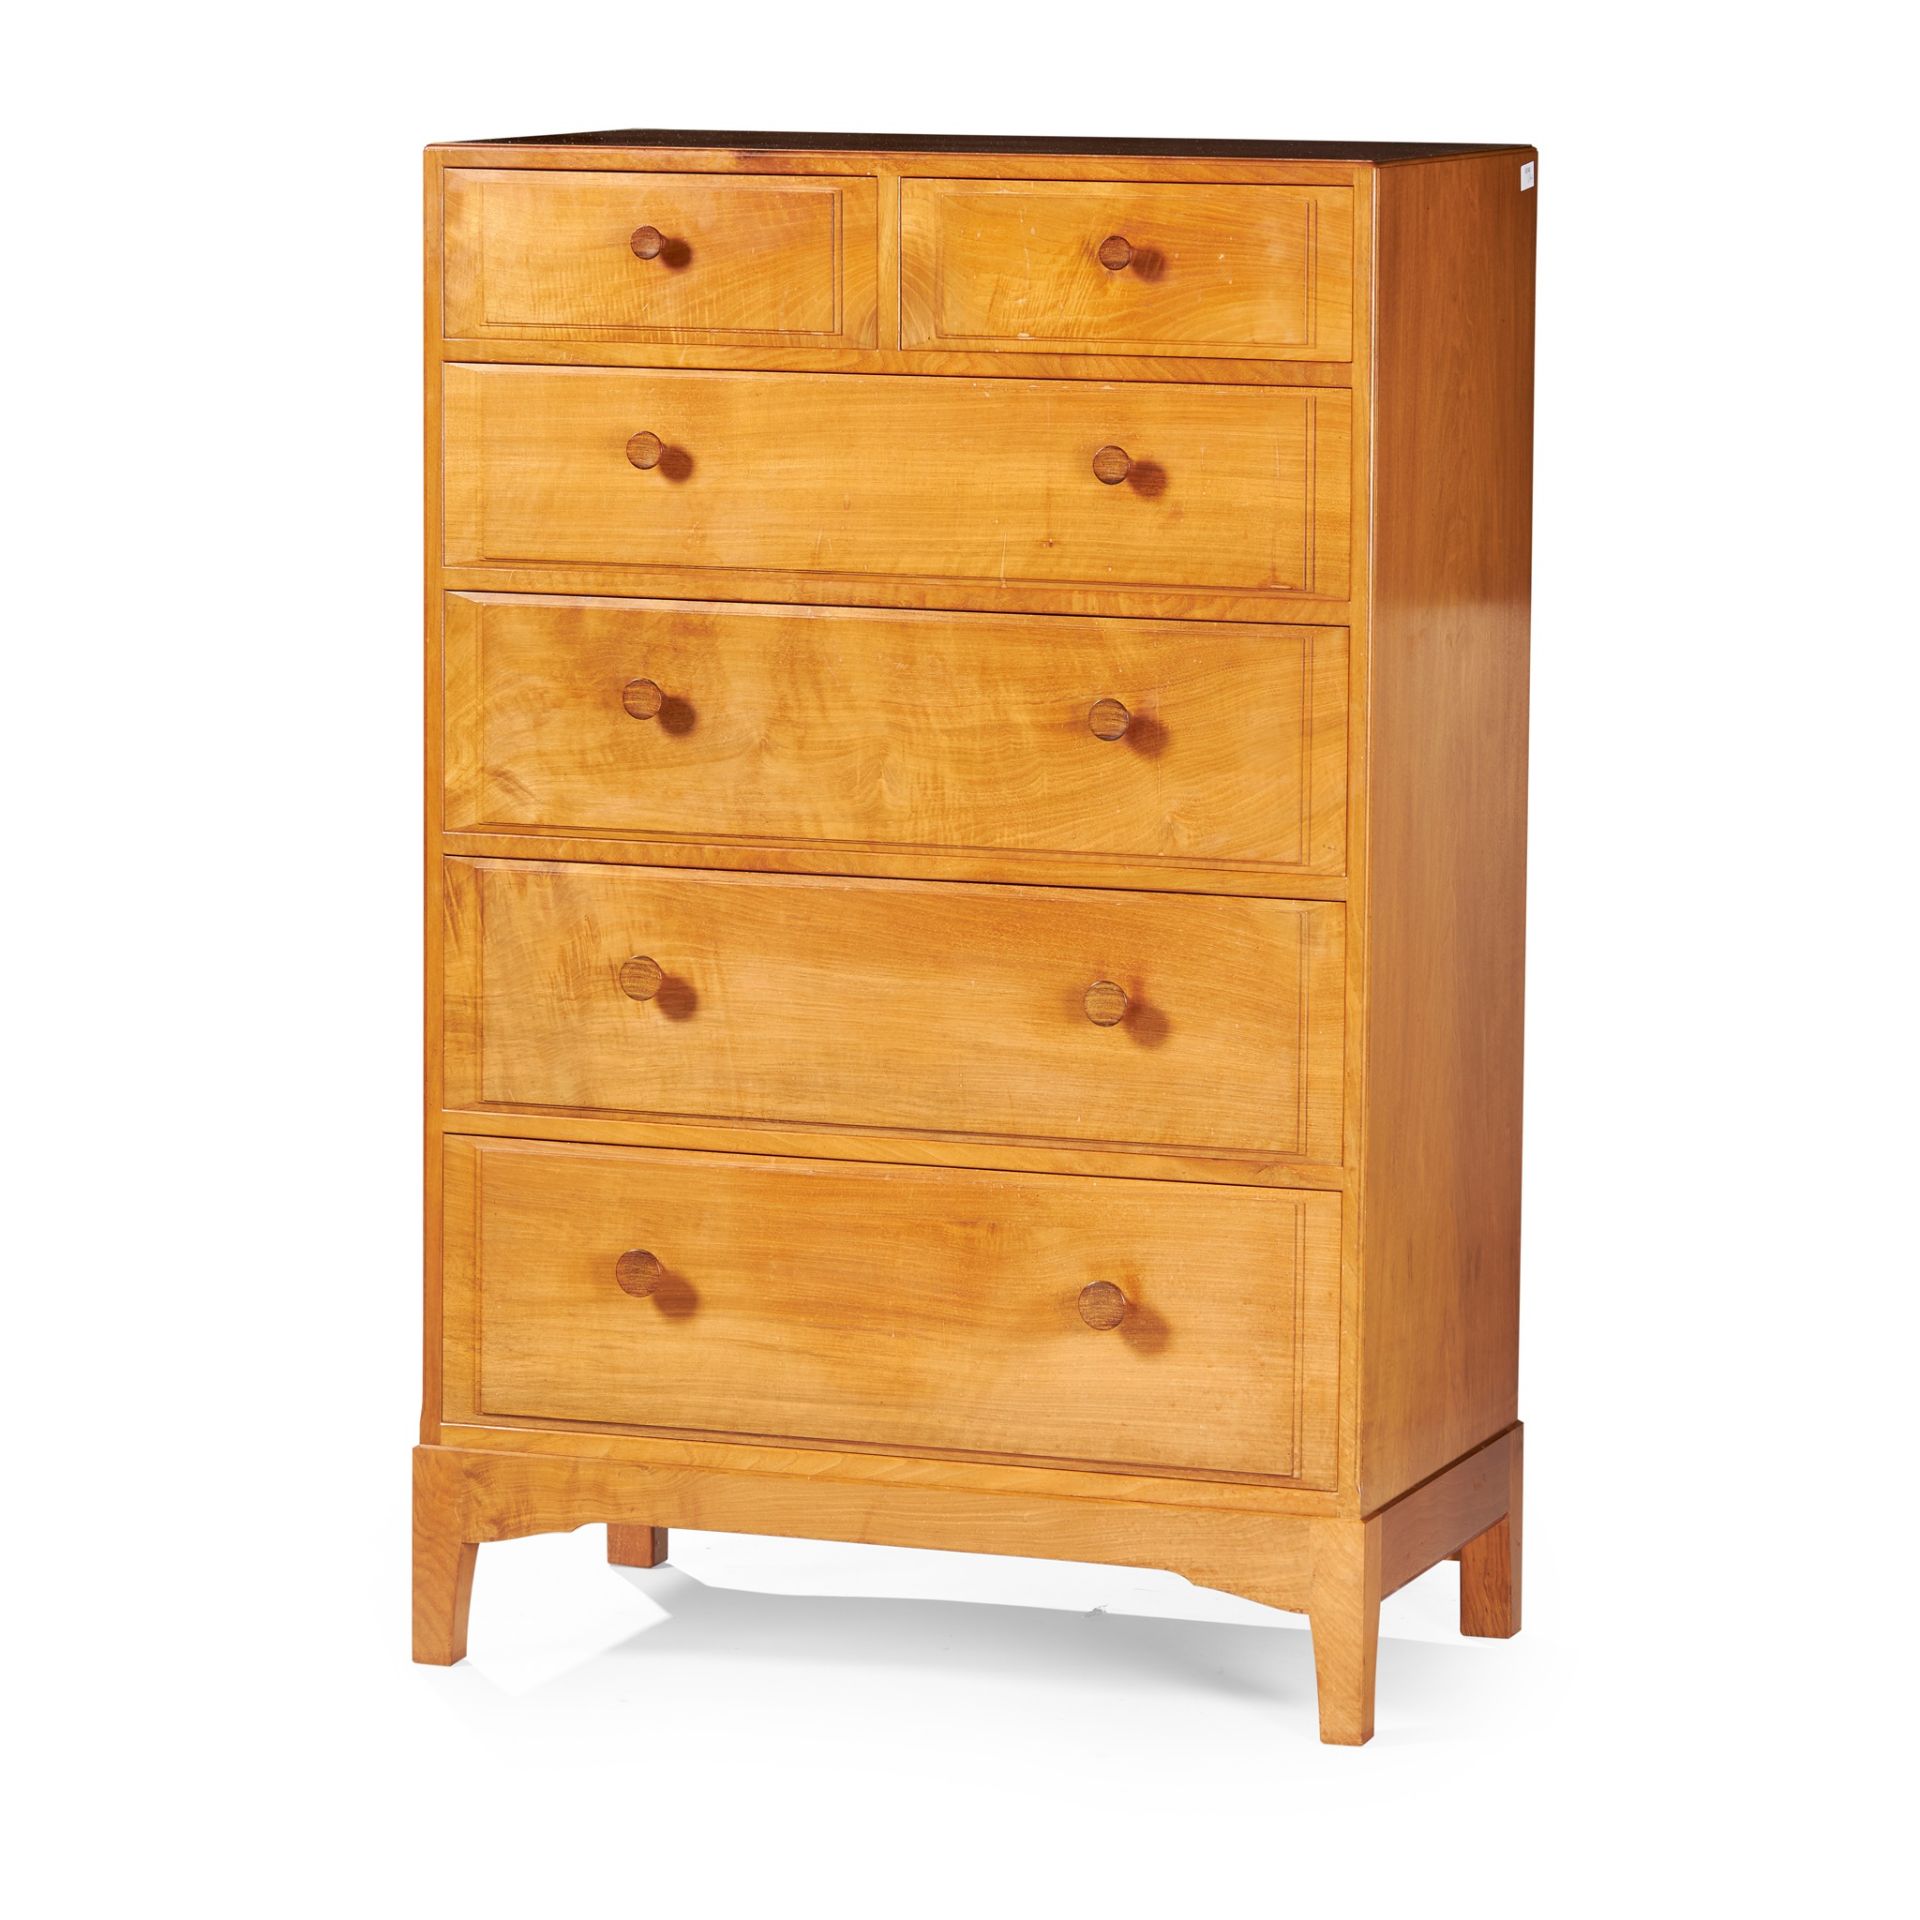 EDWARD BARNSLEY (1900-1987) TALL CHEST OF DRAWERS, CIRCA 1950 - Image 2 of 2